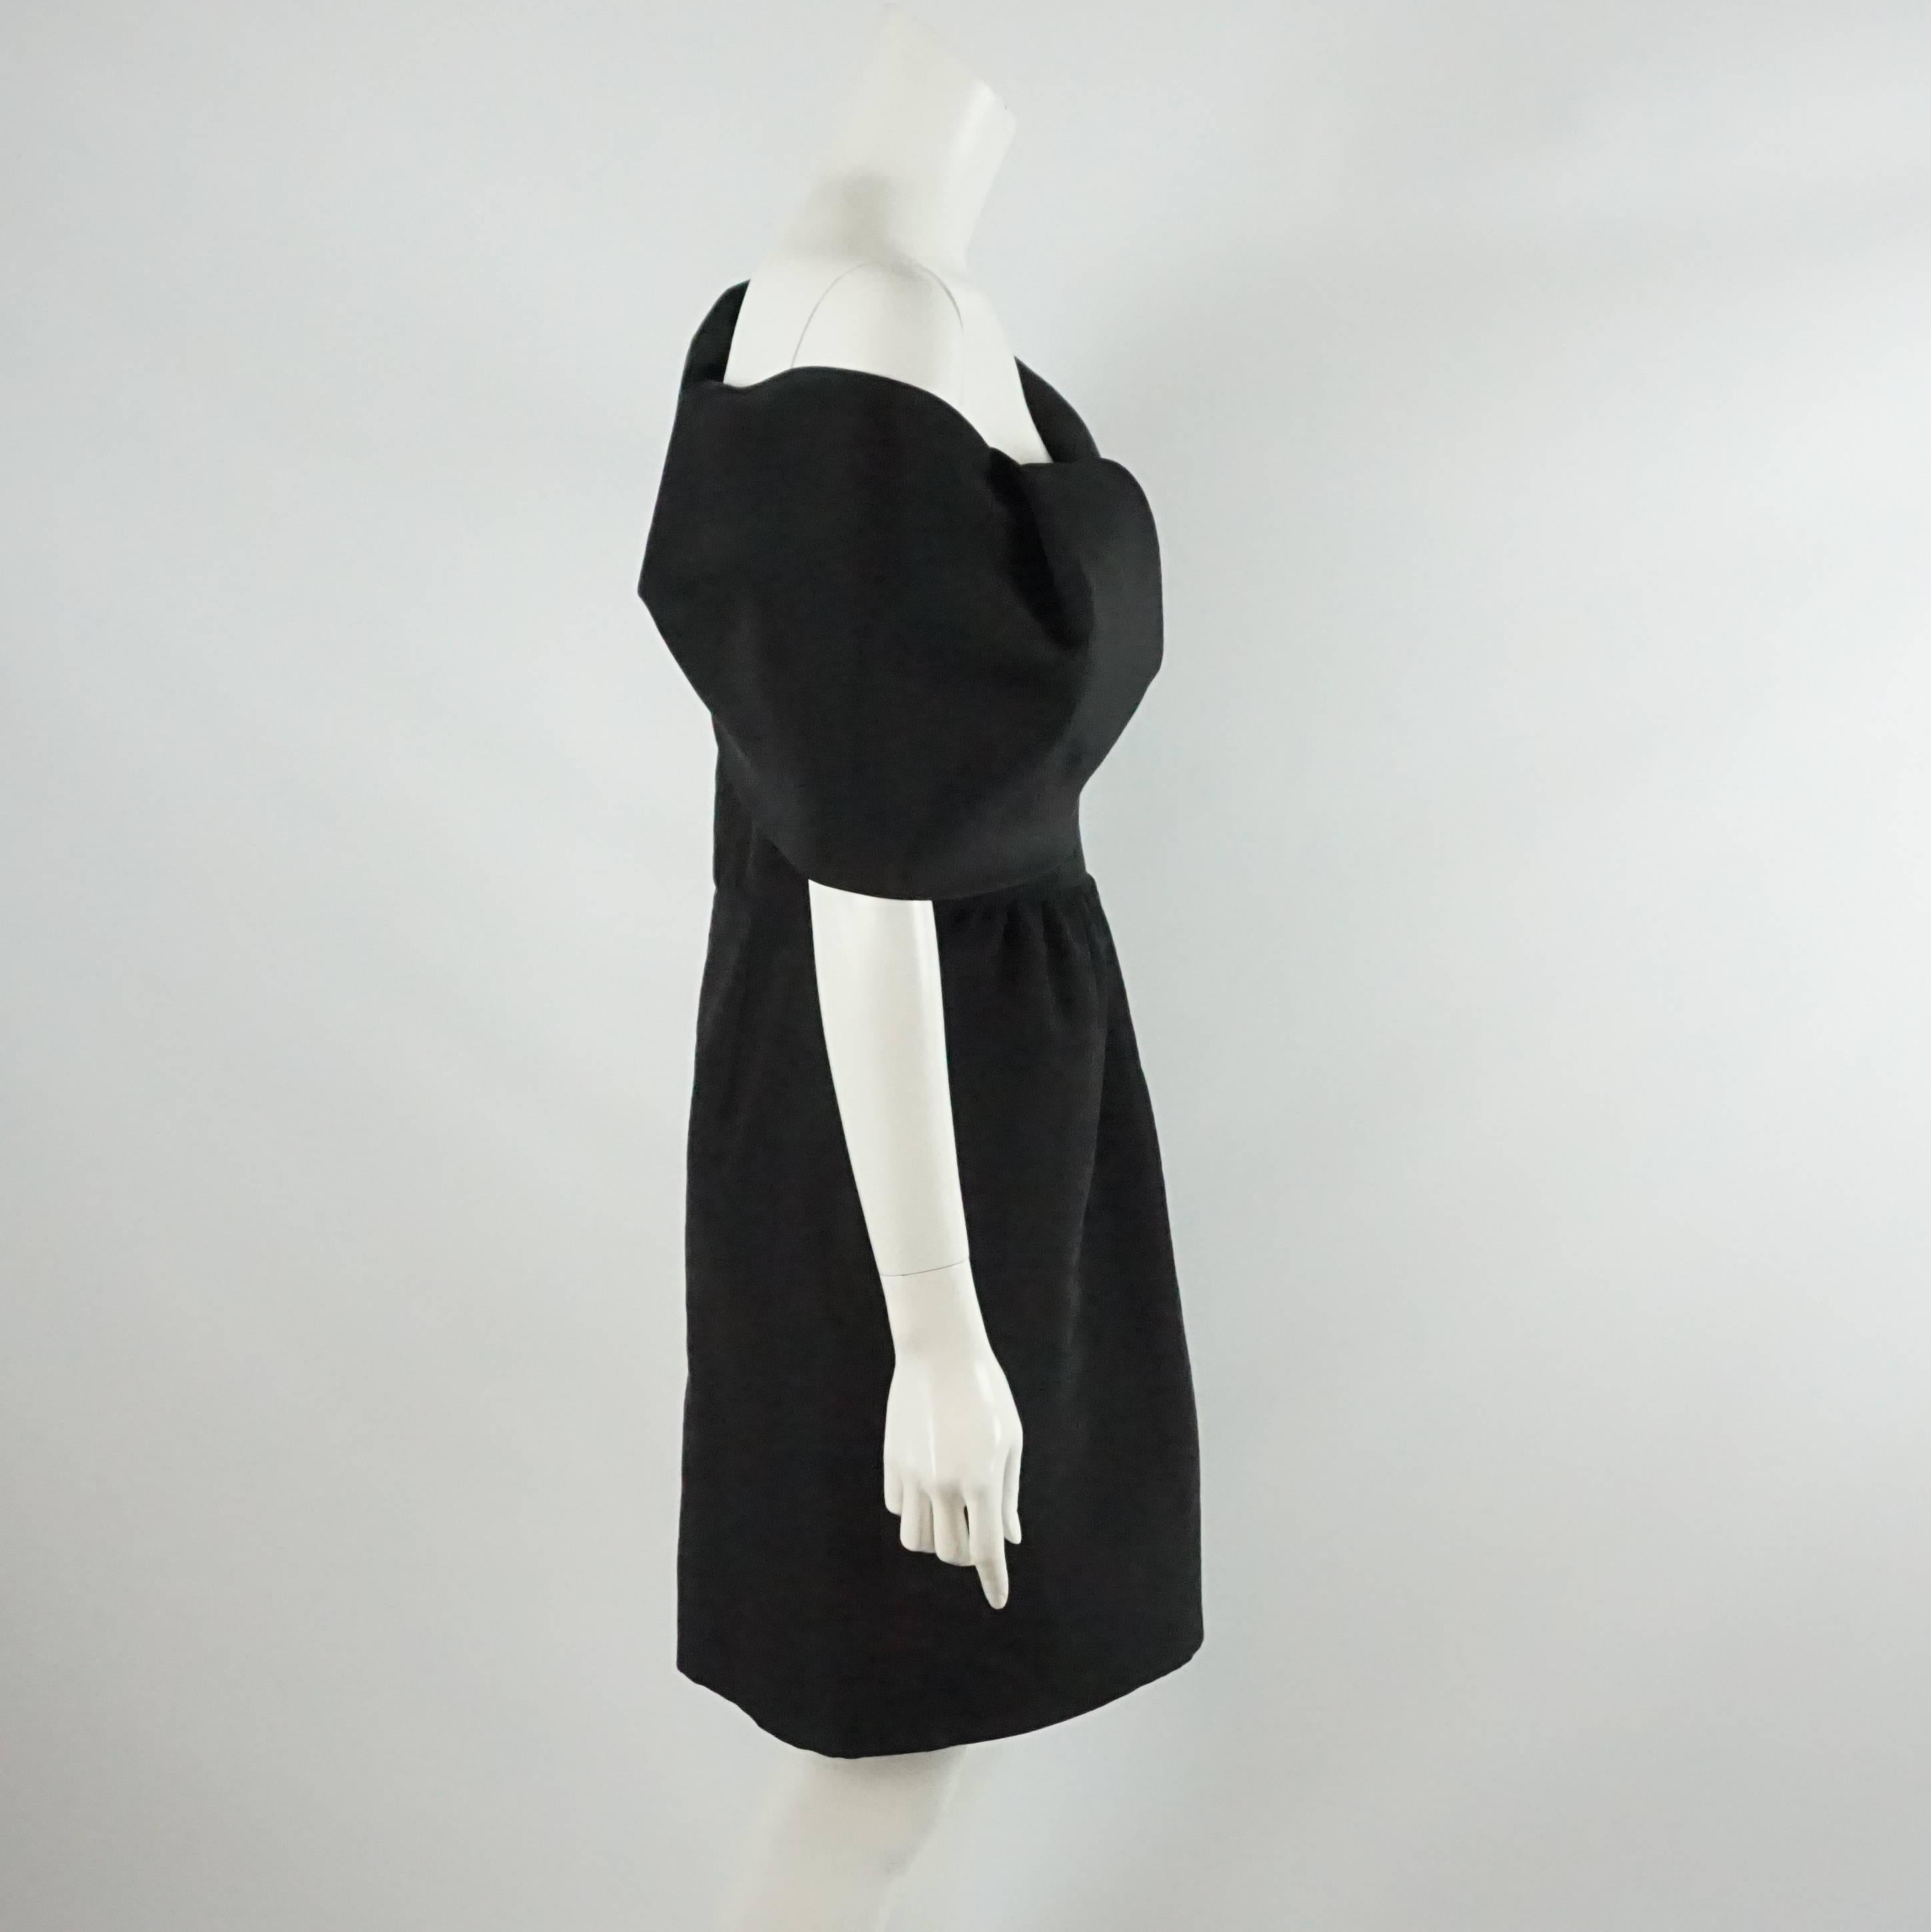 This gorgeous black Oscar dress is made of silk taffeta. It has a one shoulder/over the shoulder neckline with a collar that has a folded over look. The dress is slightly gathered at the waist flowing into the skirt. It is a size 10 and in excellent